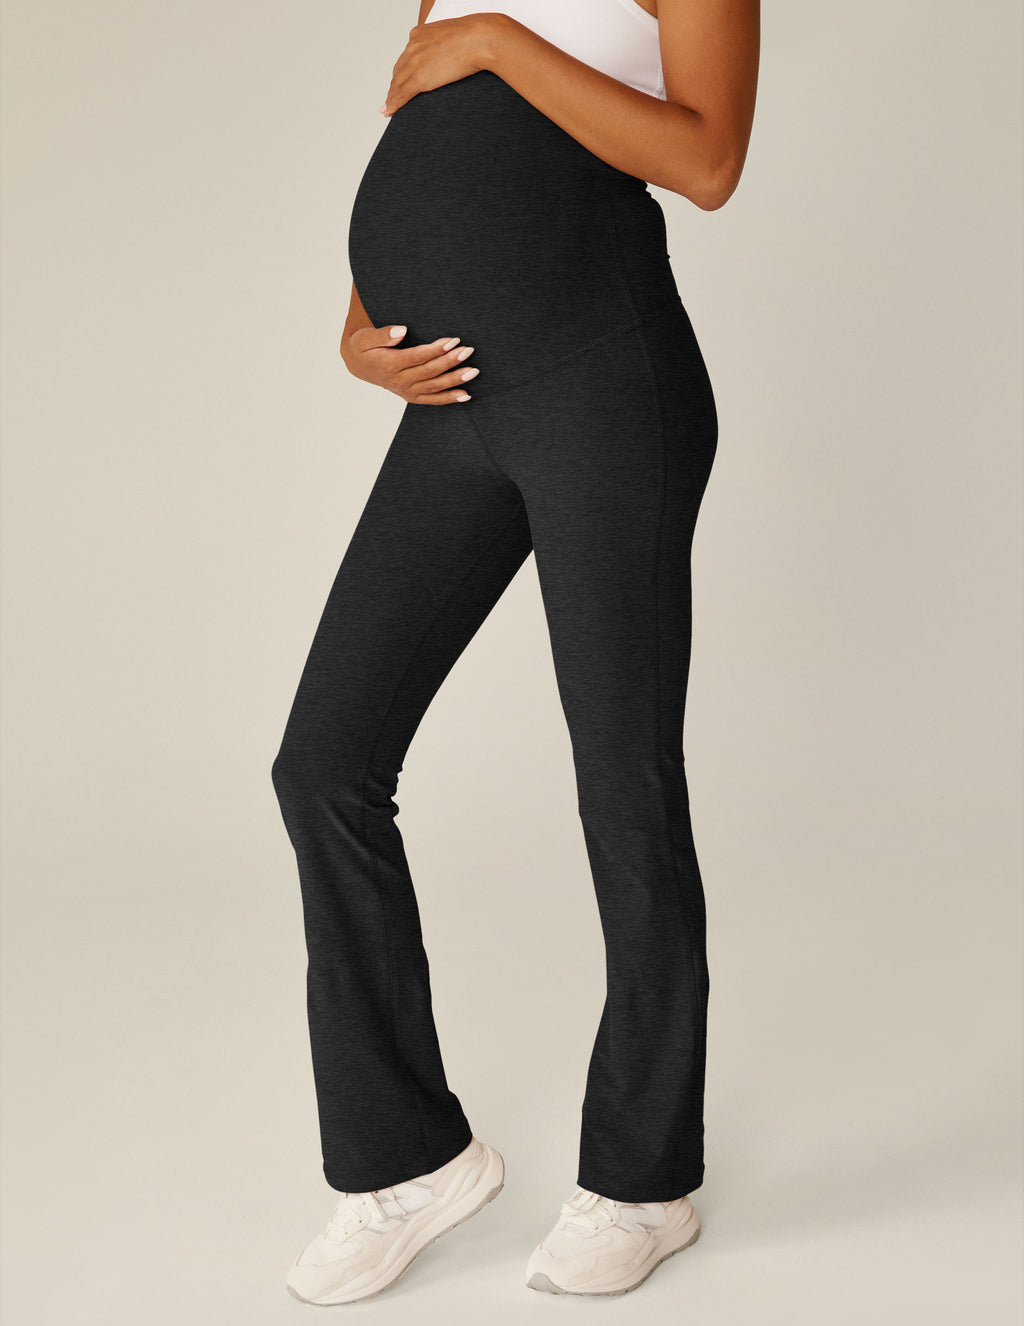 Spacedye Practice Maternity Pant Featured Image